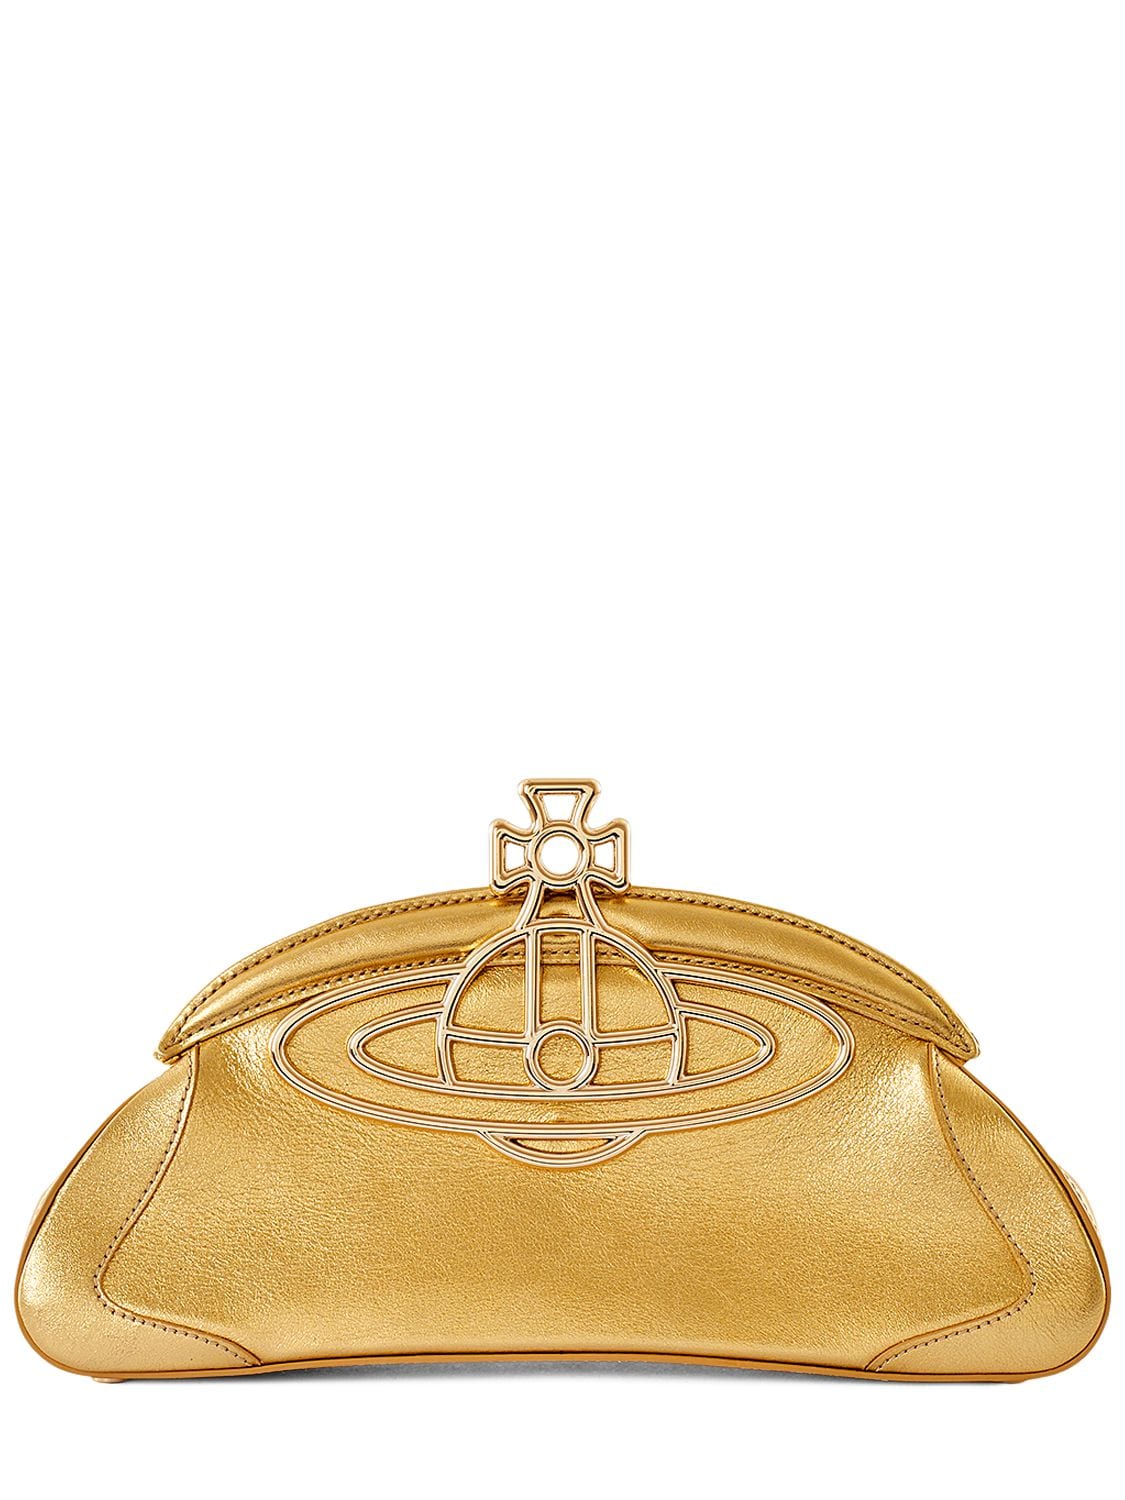 Image of Amber Leather Clutch